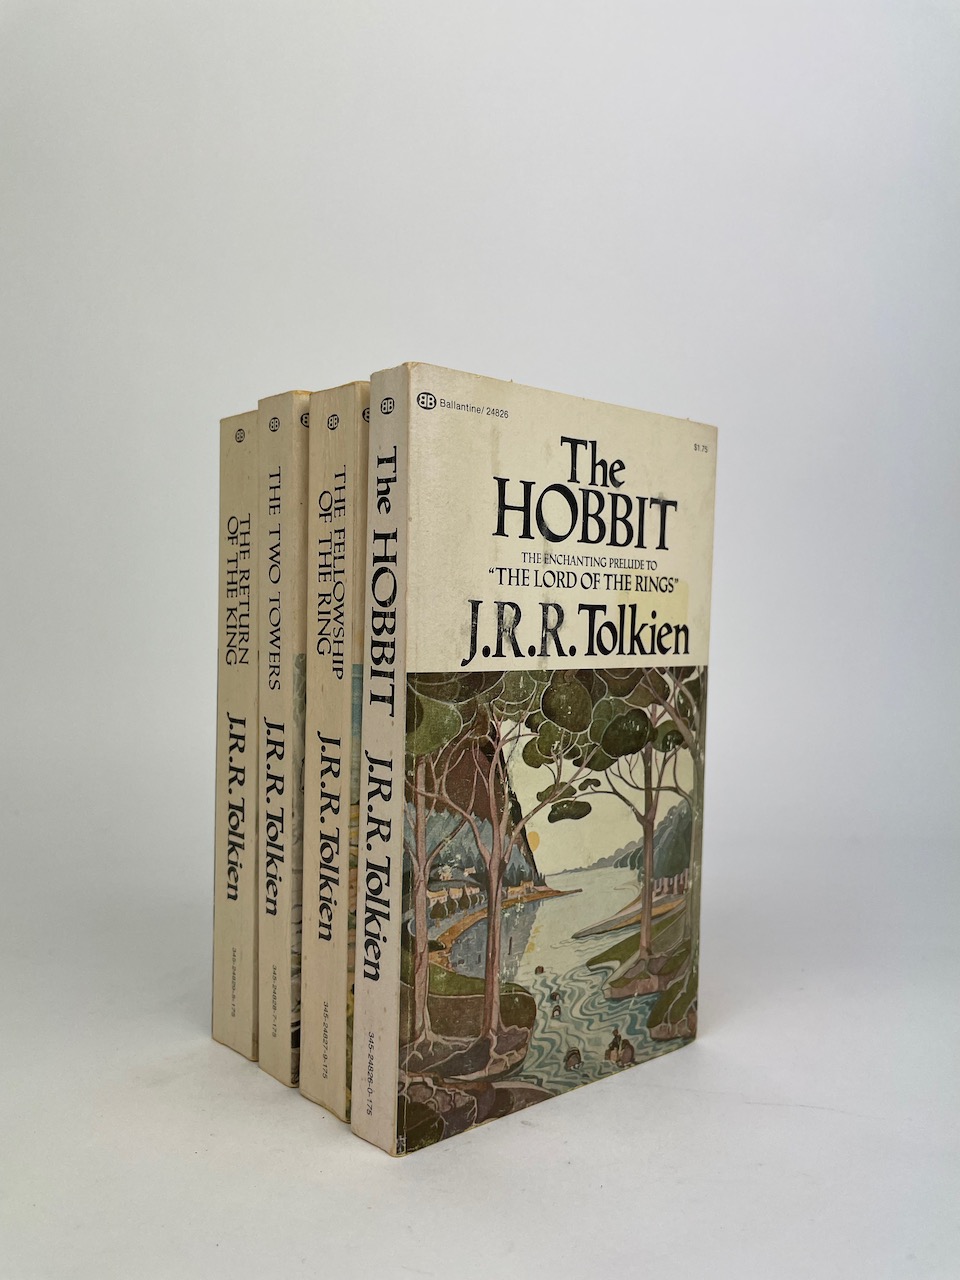 The Hobbit and The Lord of the Rings, Four Paperback Book Boxset from 1975, Gold Slipcase 9